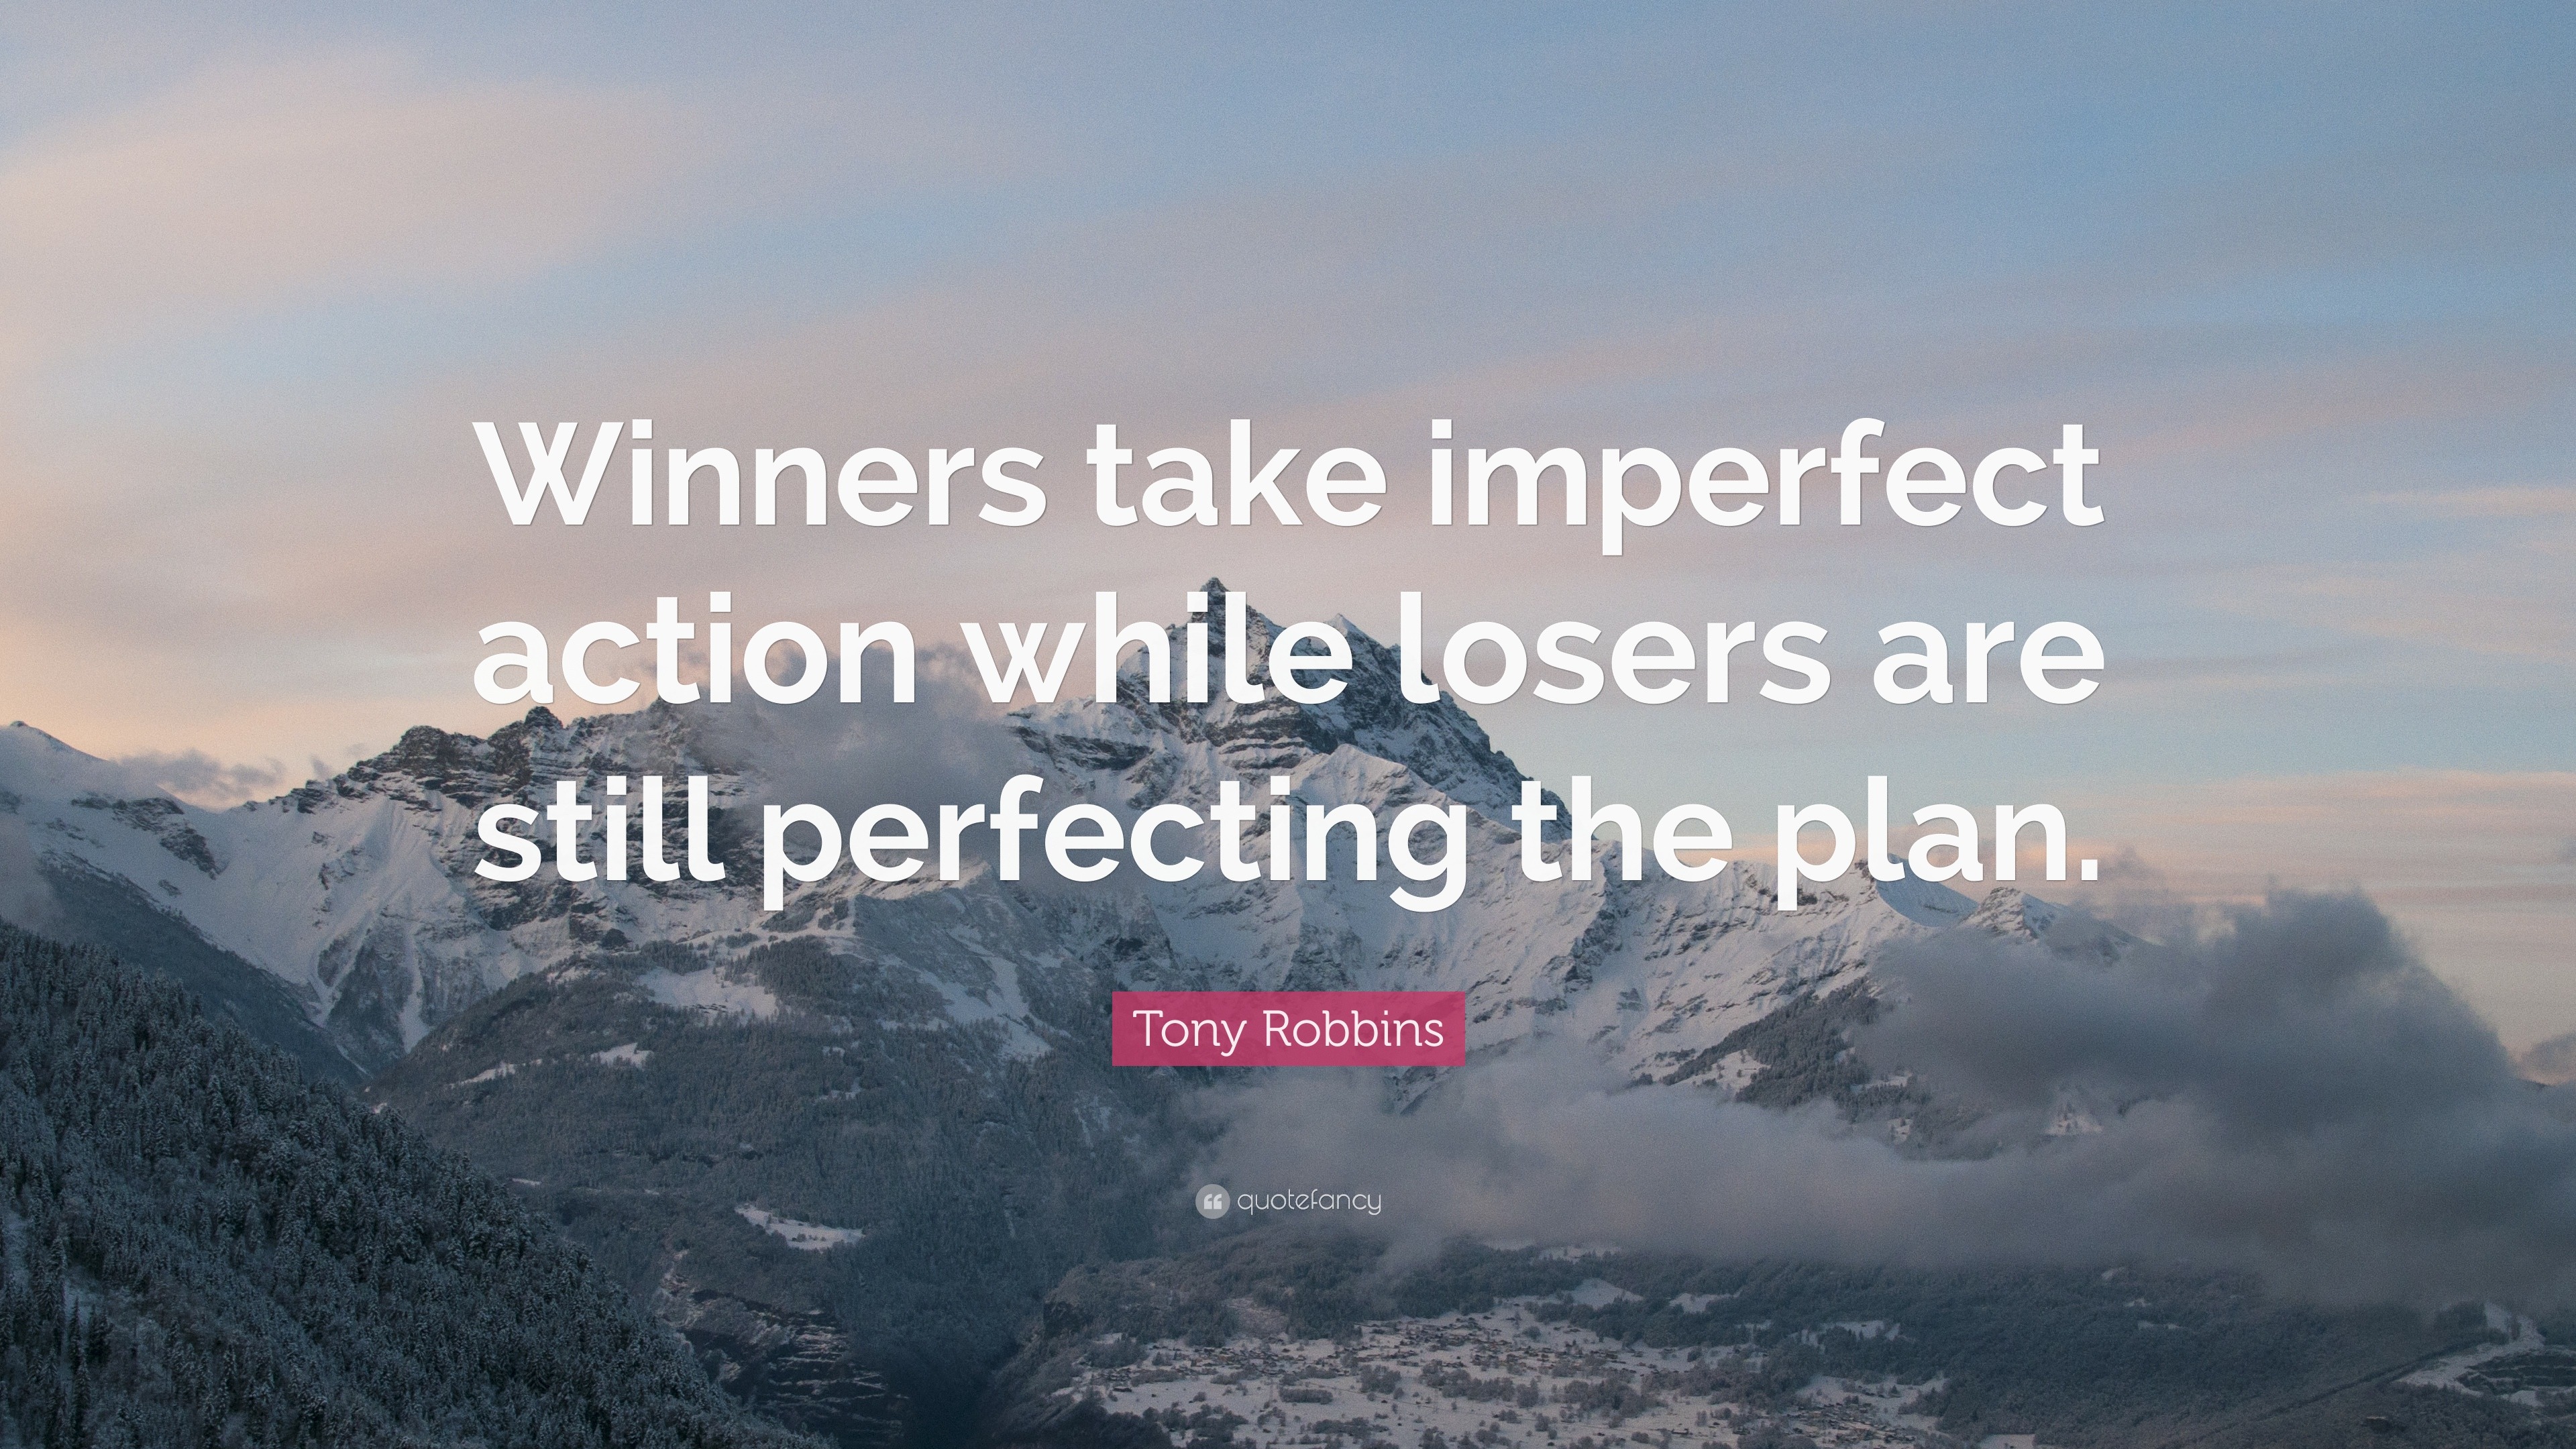 https://quotefancy.com/media/wallpaper/3840x2160/237468-Tony-Robbins-Quote-Winners-take-imperfect-action-while-losers-are.jpg